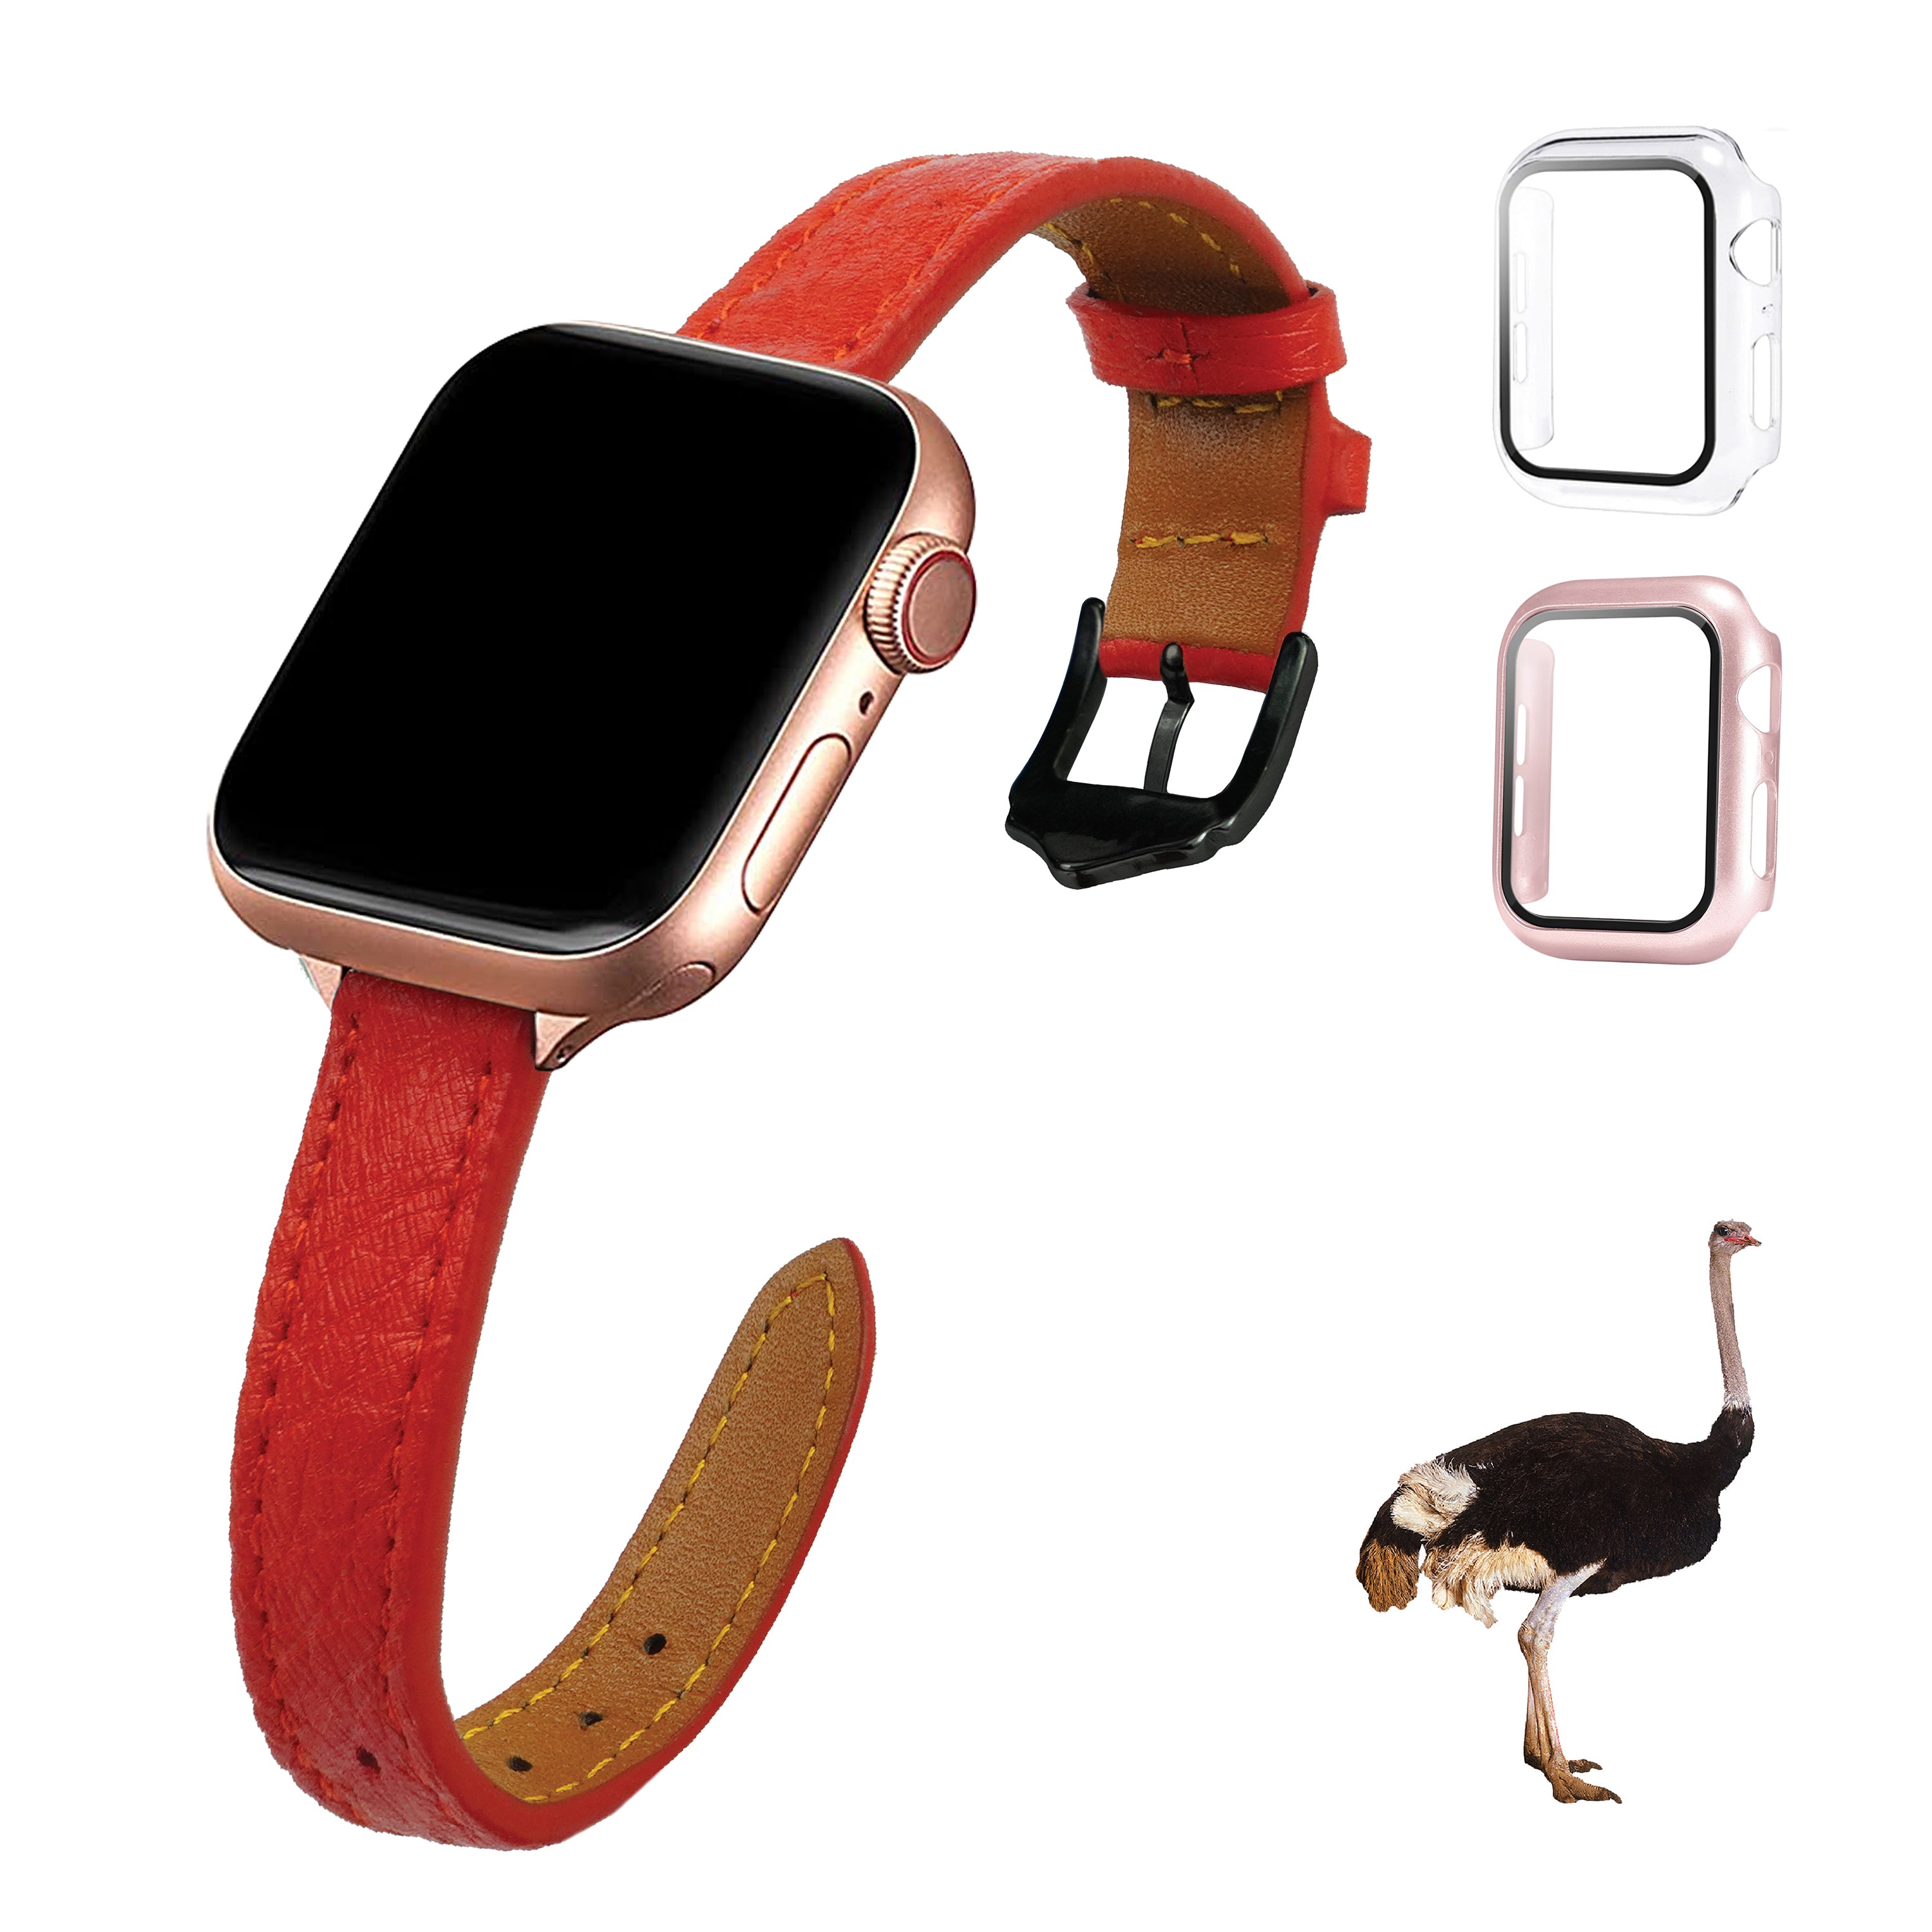 Red Flat Ostrich Leather Band Compatible Apple Watch Iwatch 42mm Screen Protector Case Black Adapter Replacement Strap For Smartwatch Series 1 2 3 Leather Handmade AW-190B-W-42MM